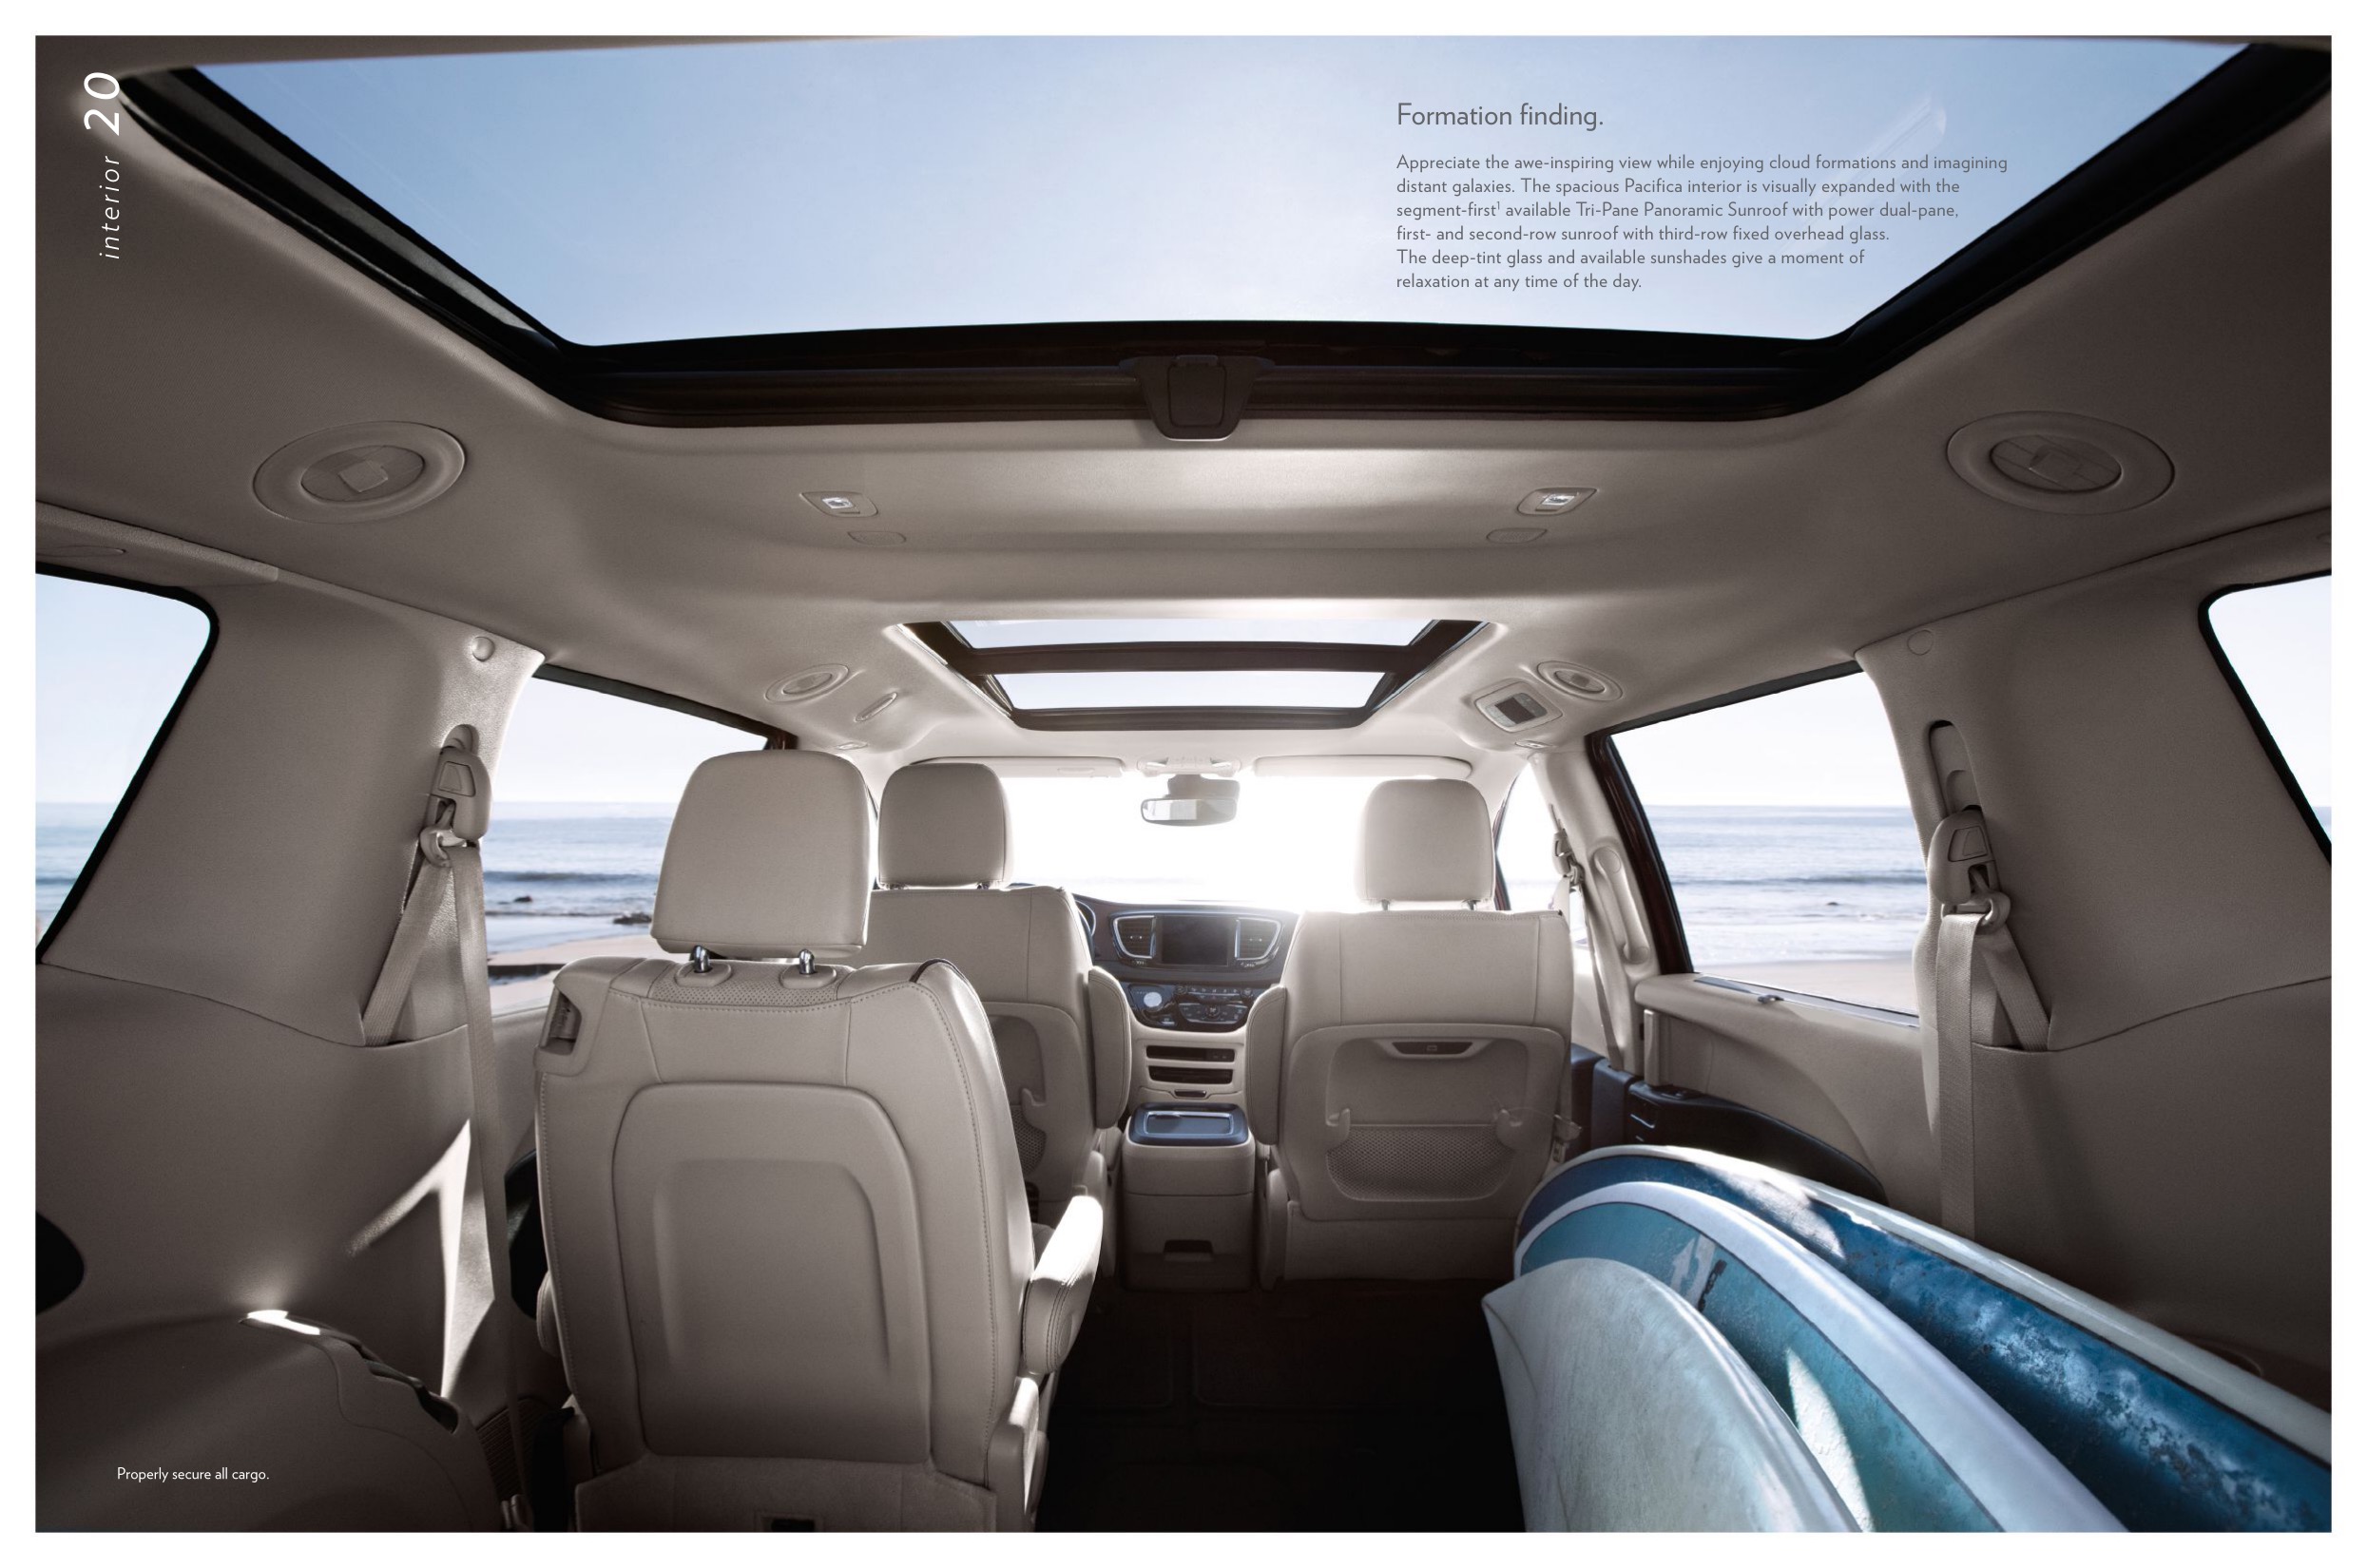 2017 Chrysler Pacifica Brochure Page 19